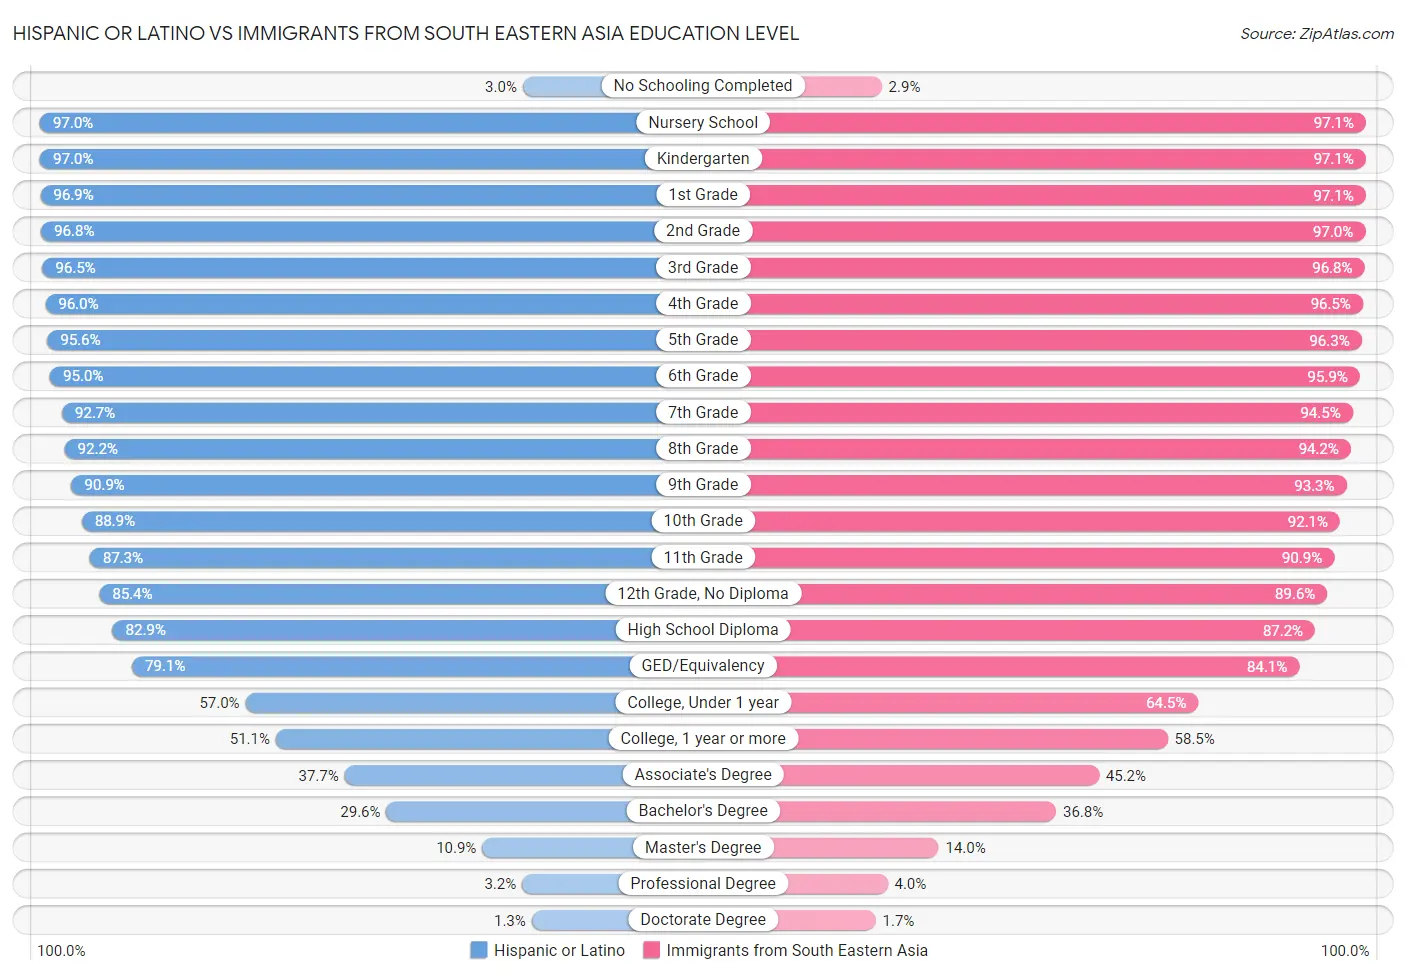 Hispanic or Latino vs Immigrants from South Eastern Asia Education Level